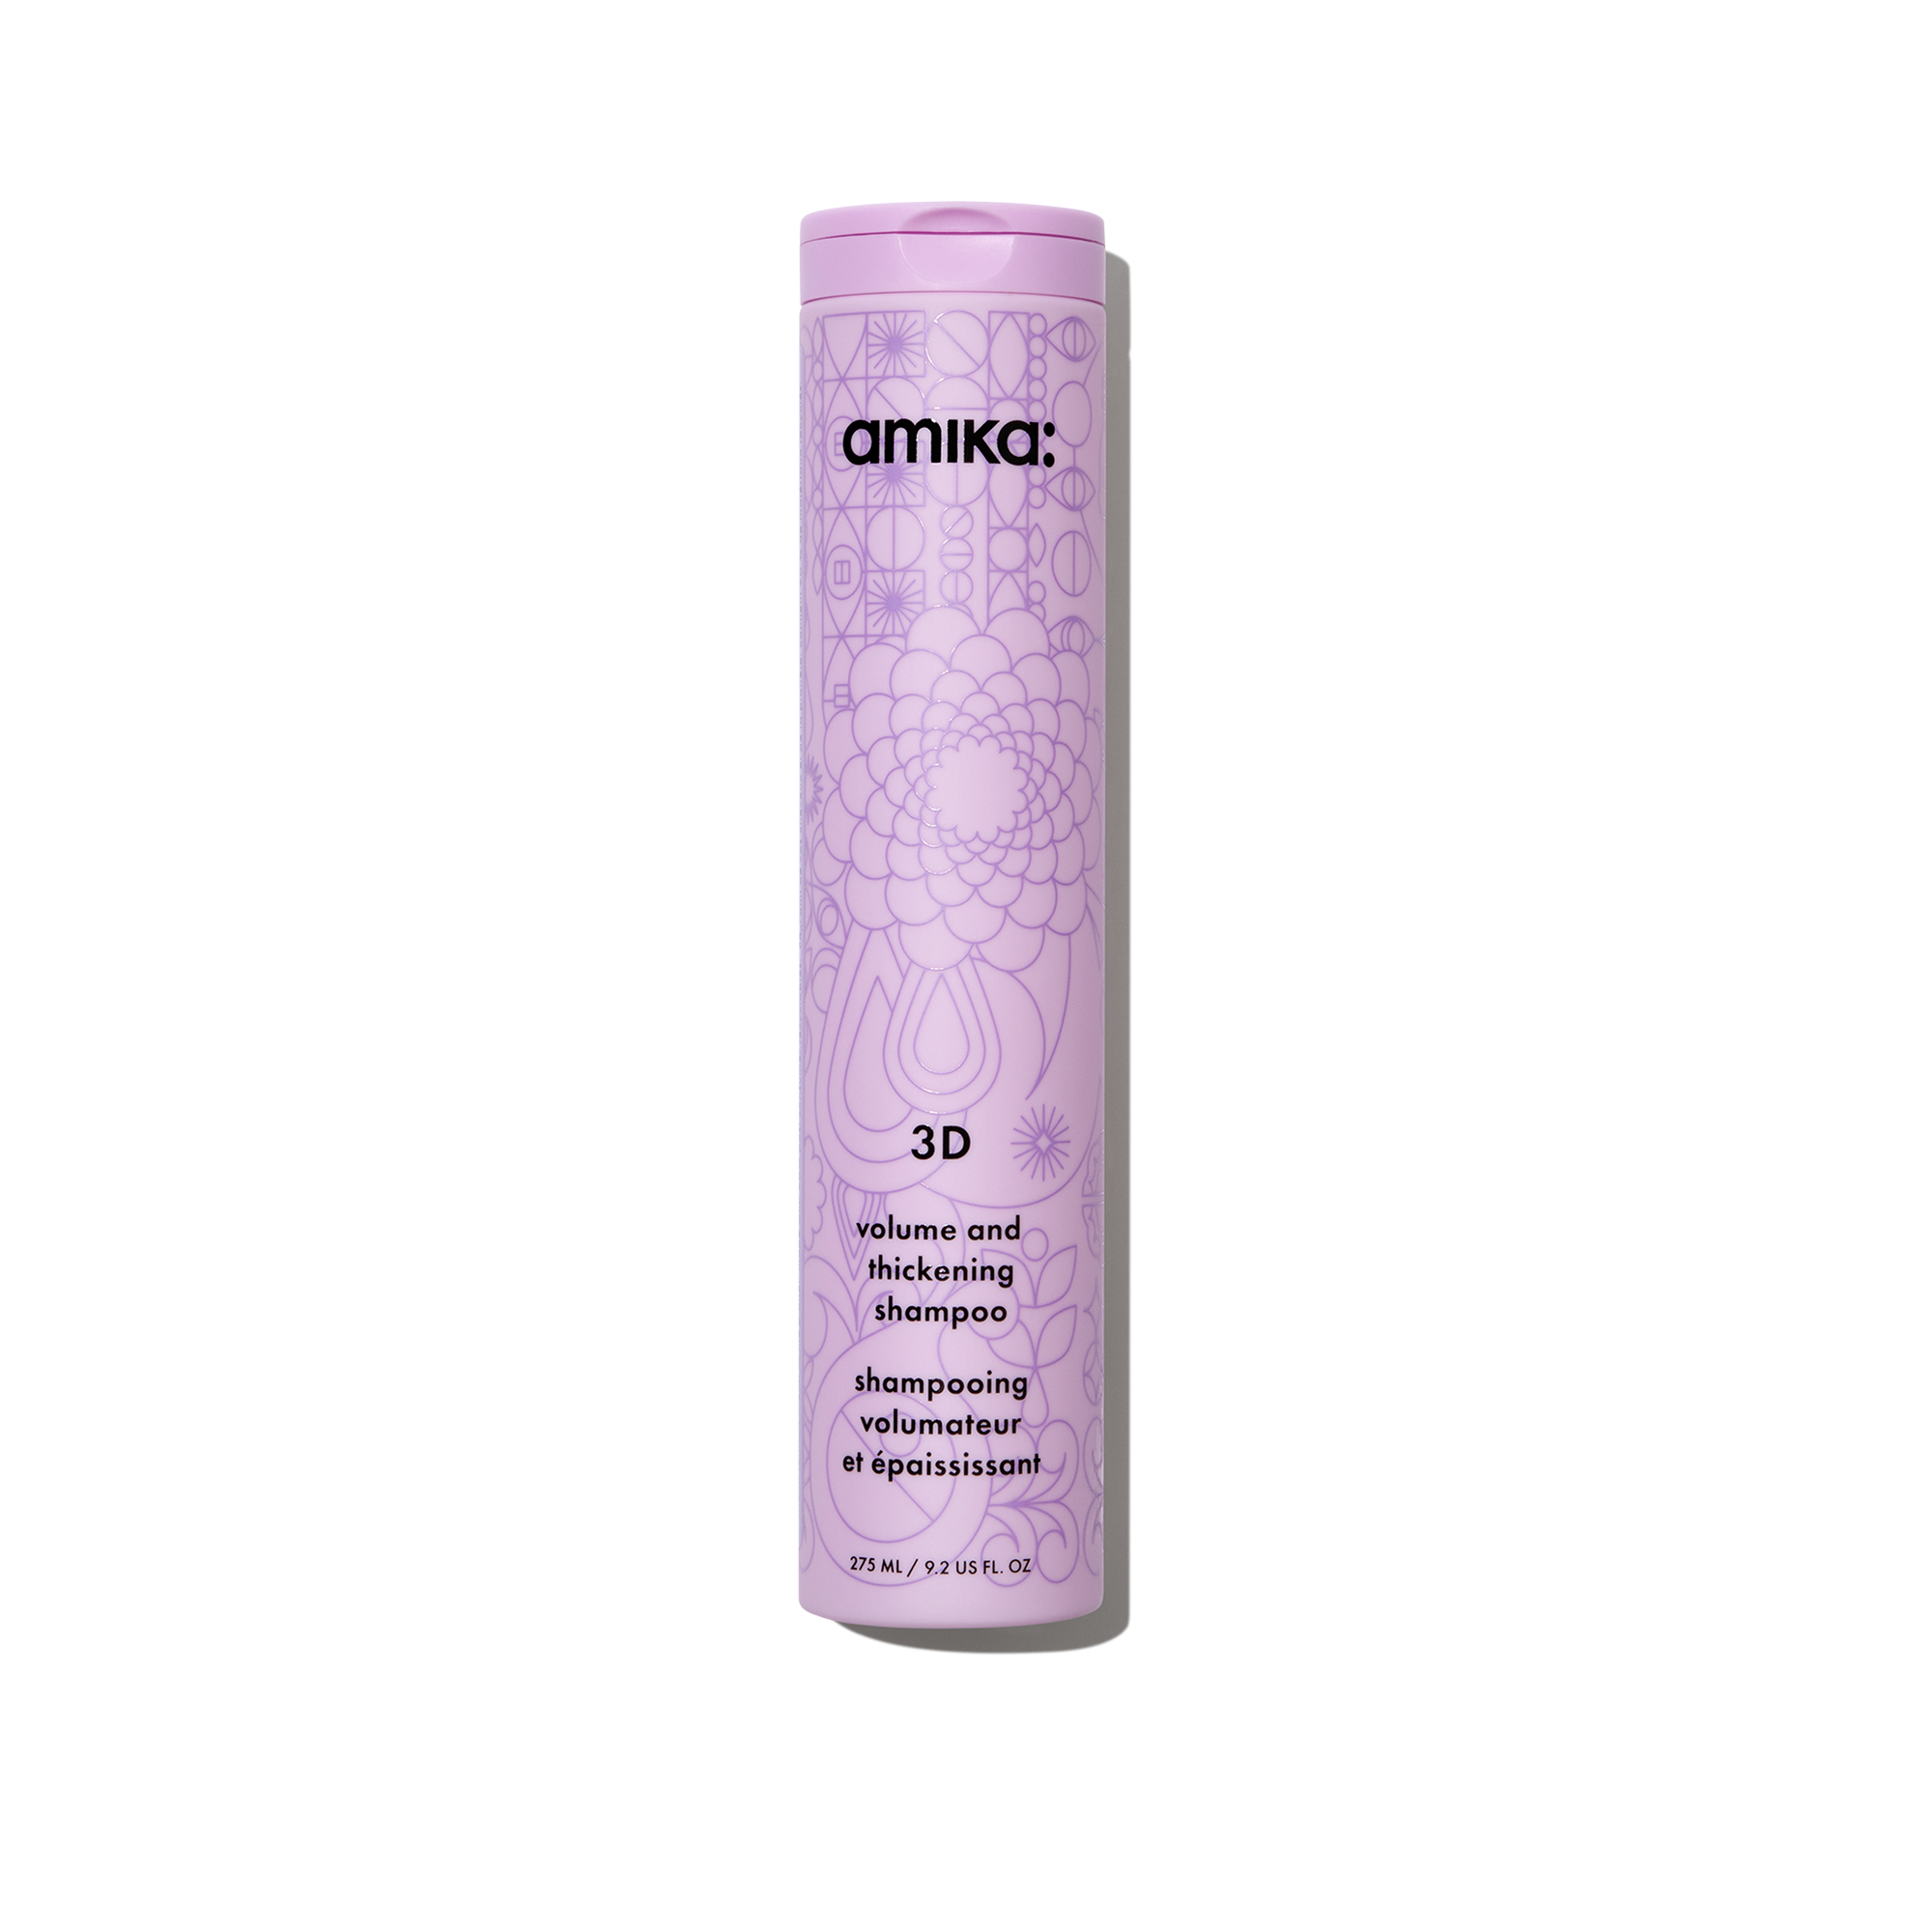 Amika 3D Volume and Thickening Shampoo and Conditioner Duo - 9.2oz ($52 Value) / 9.2OZ